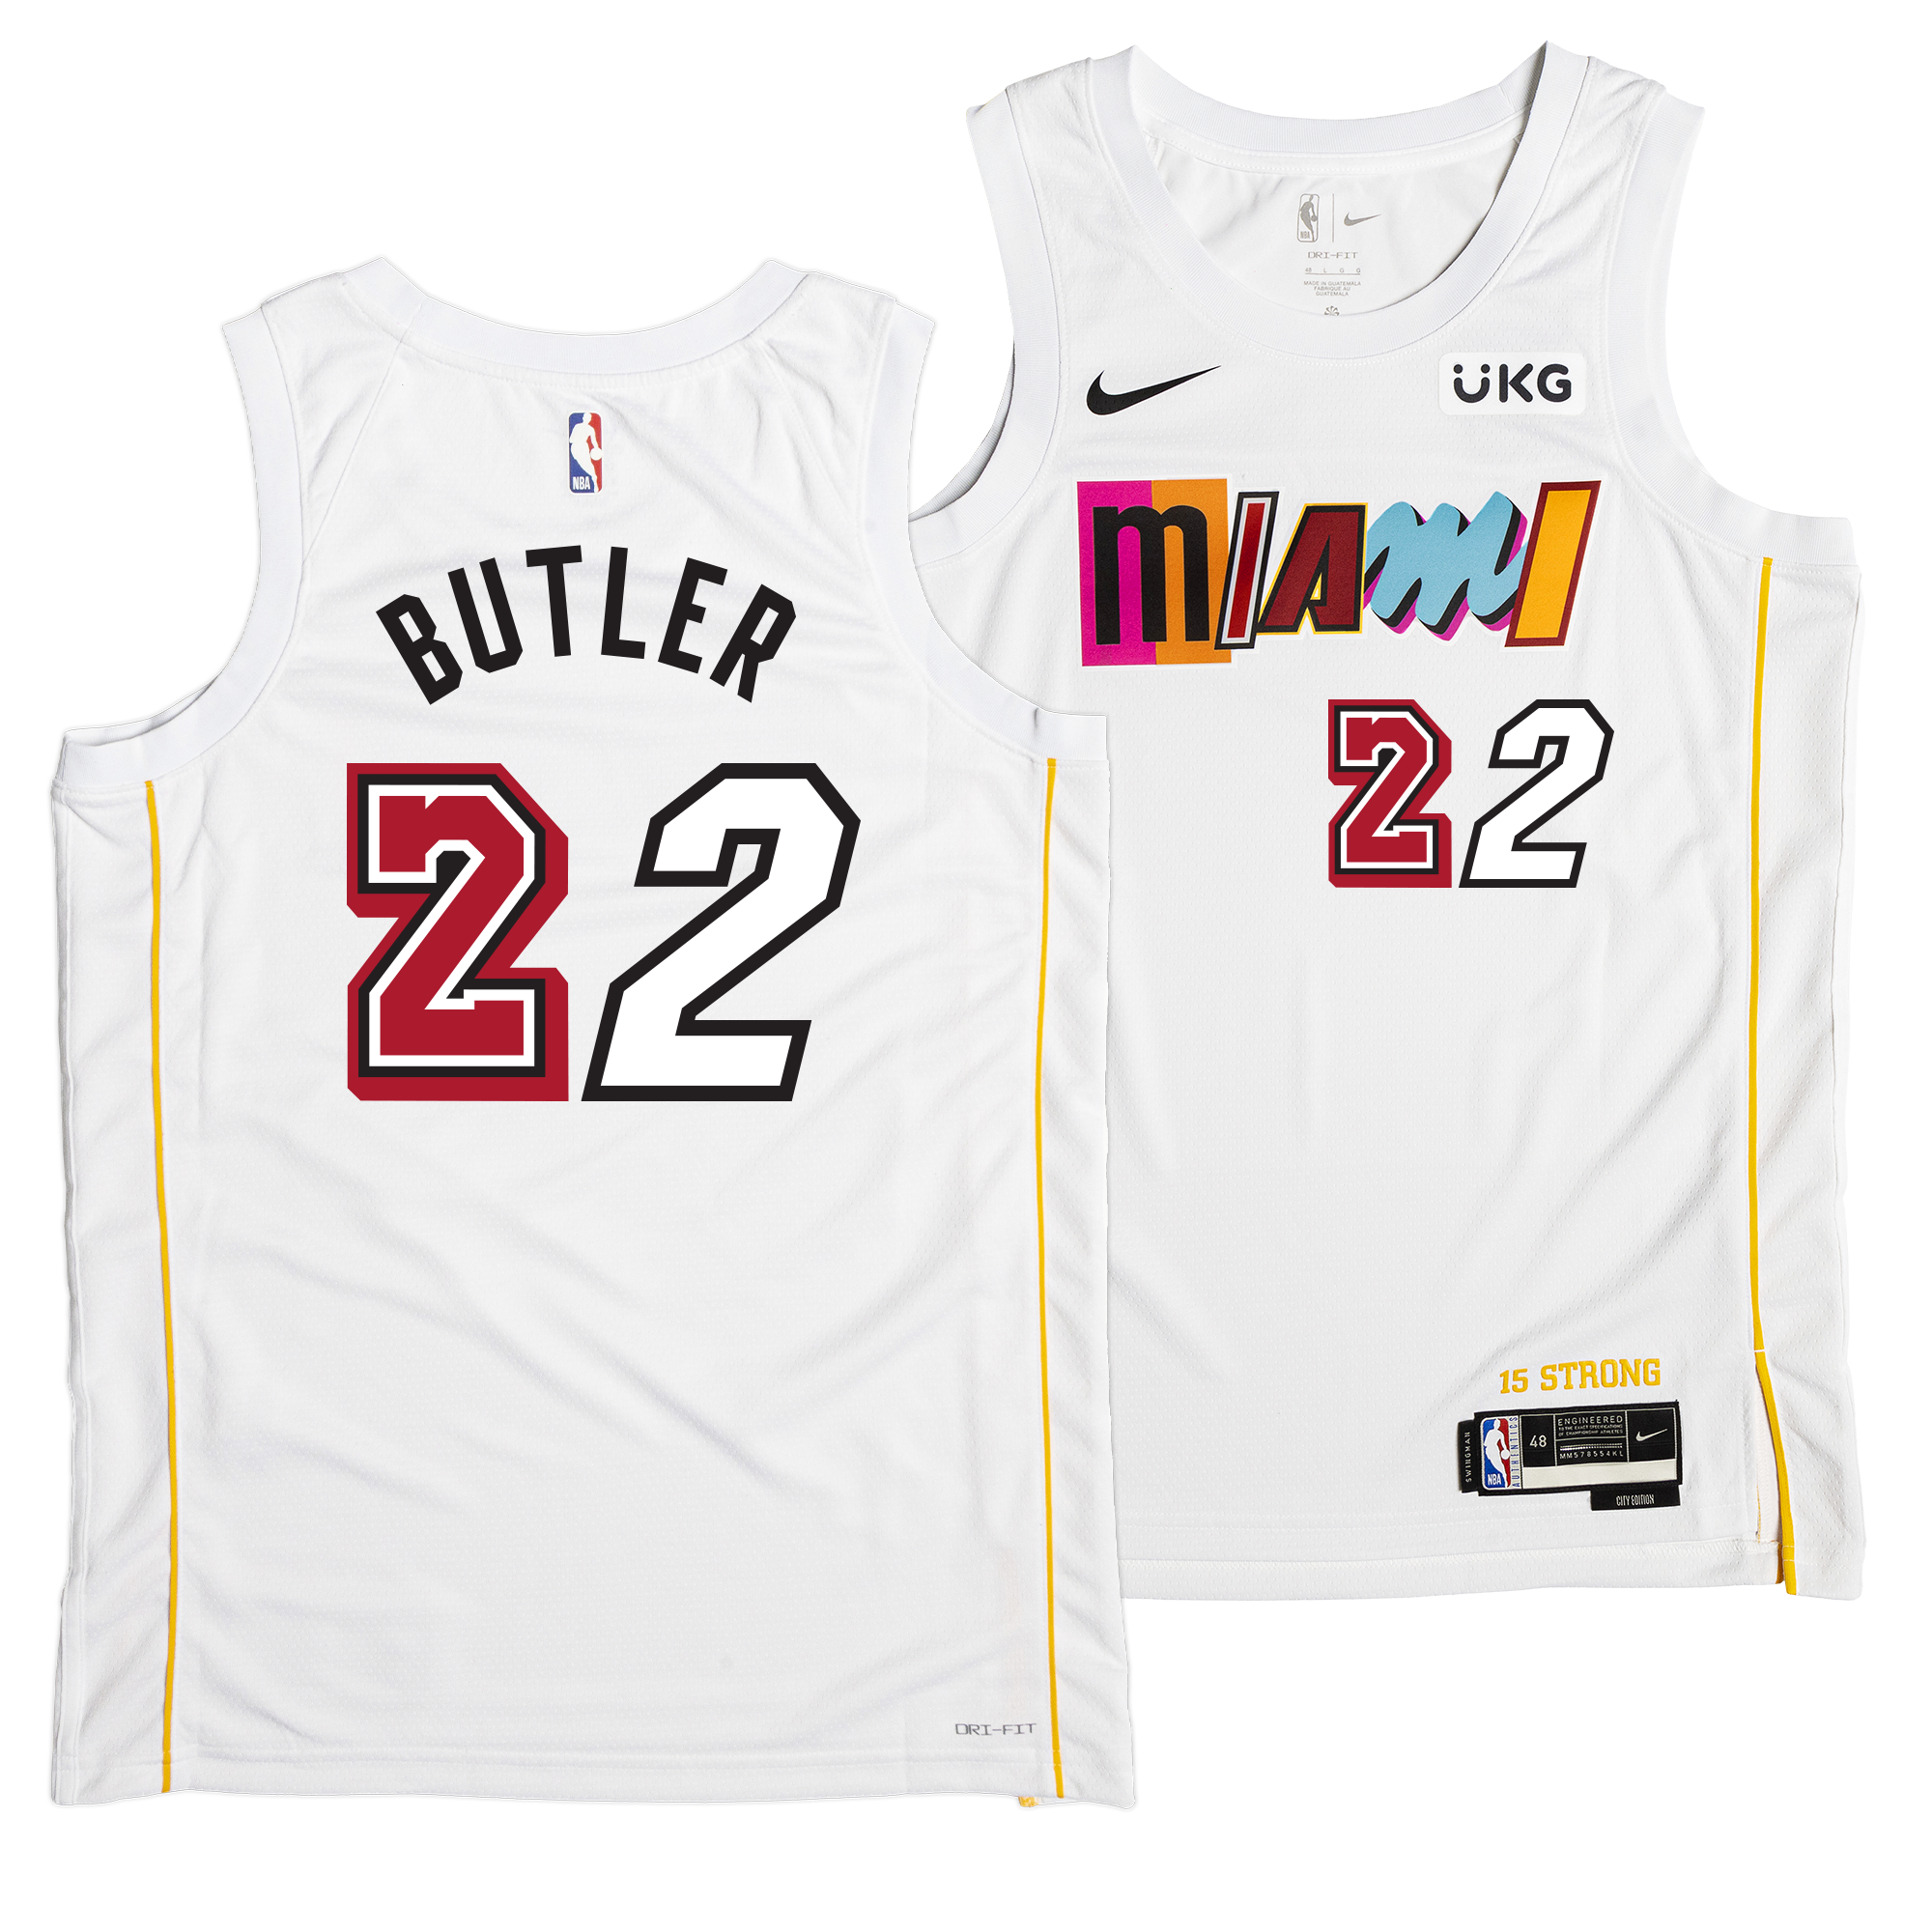 Youth Miami Heat Jimmy Butler Nike Black 2021/22 City Edition Name & Number  T-Shirt